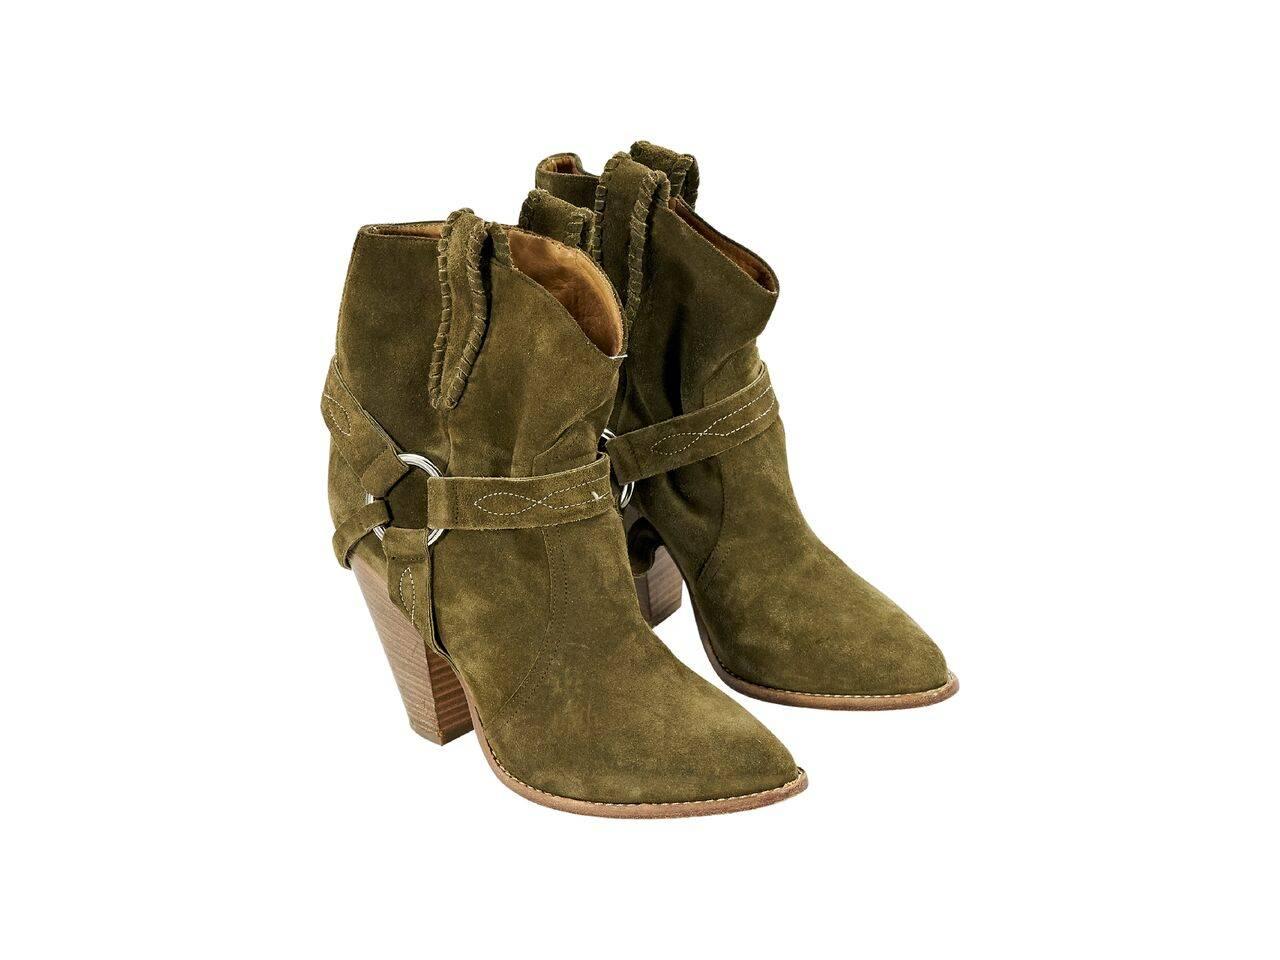 Product details:  Olive green suede Rawson ankle boots by Etoile Isabel Marant.  Dual top pull tabs.  Chunky stacked heel.  Rounded almond toe.  Pull-on style.  
Condition: Pre-owned. Very good.
Est. Retail $ 895.00